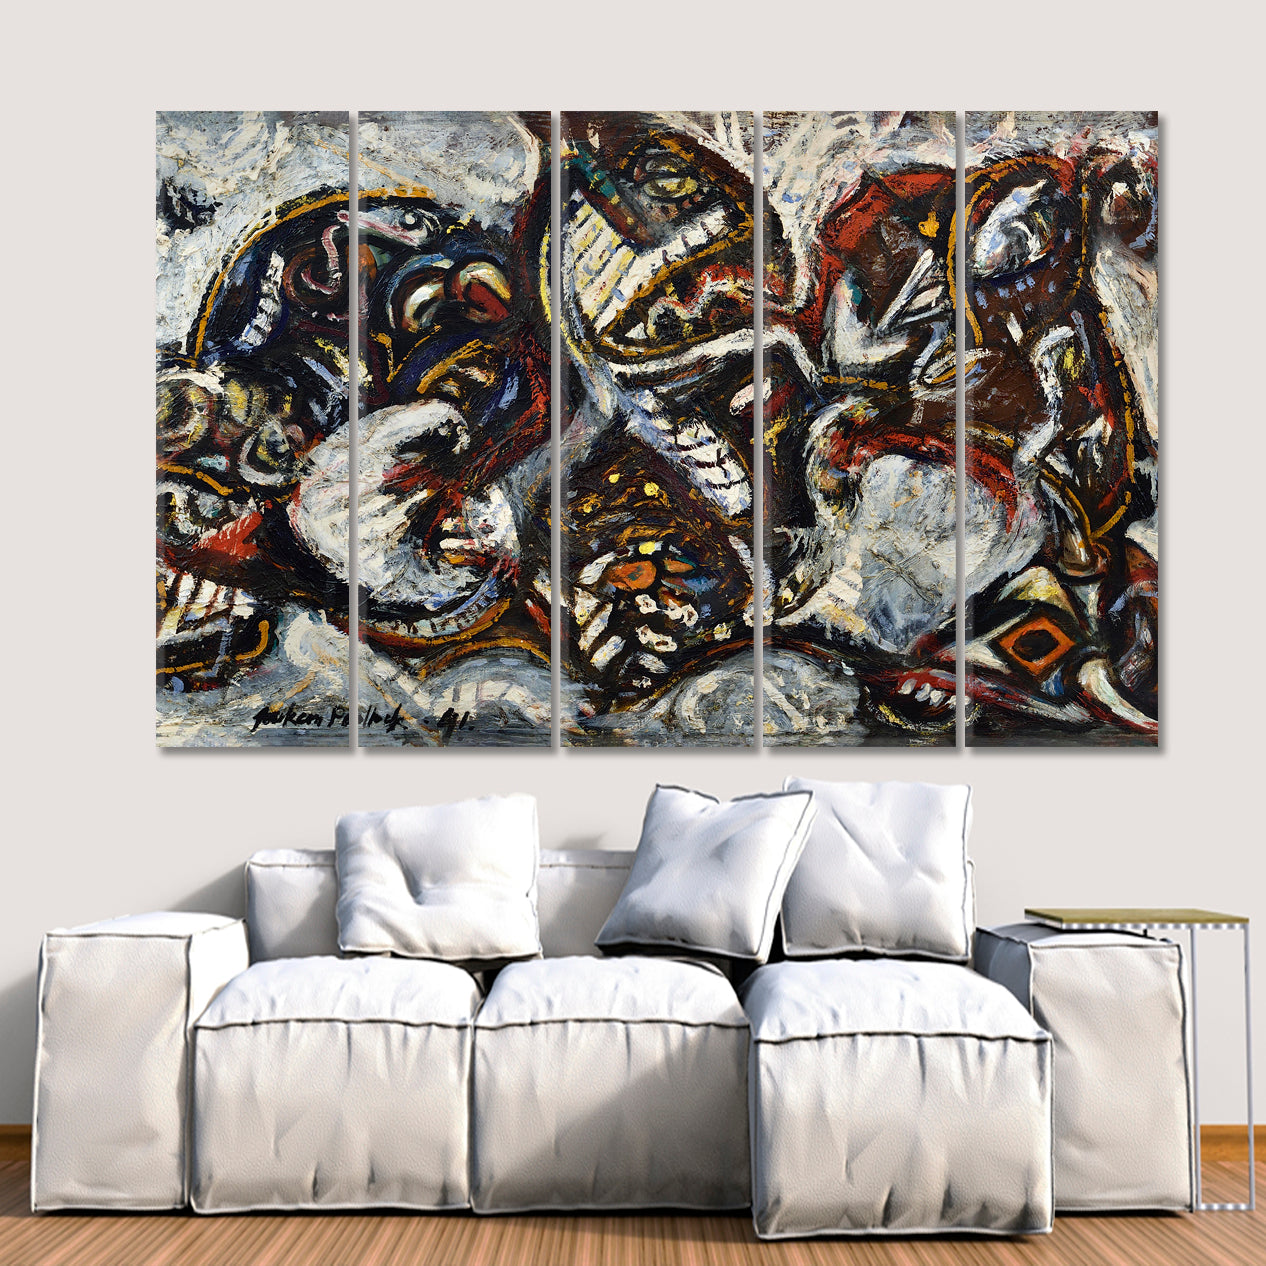 MASKED FORMS Jackson Pollock Style Contemporary Art Artesty 5 panels 36" x 24" 